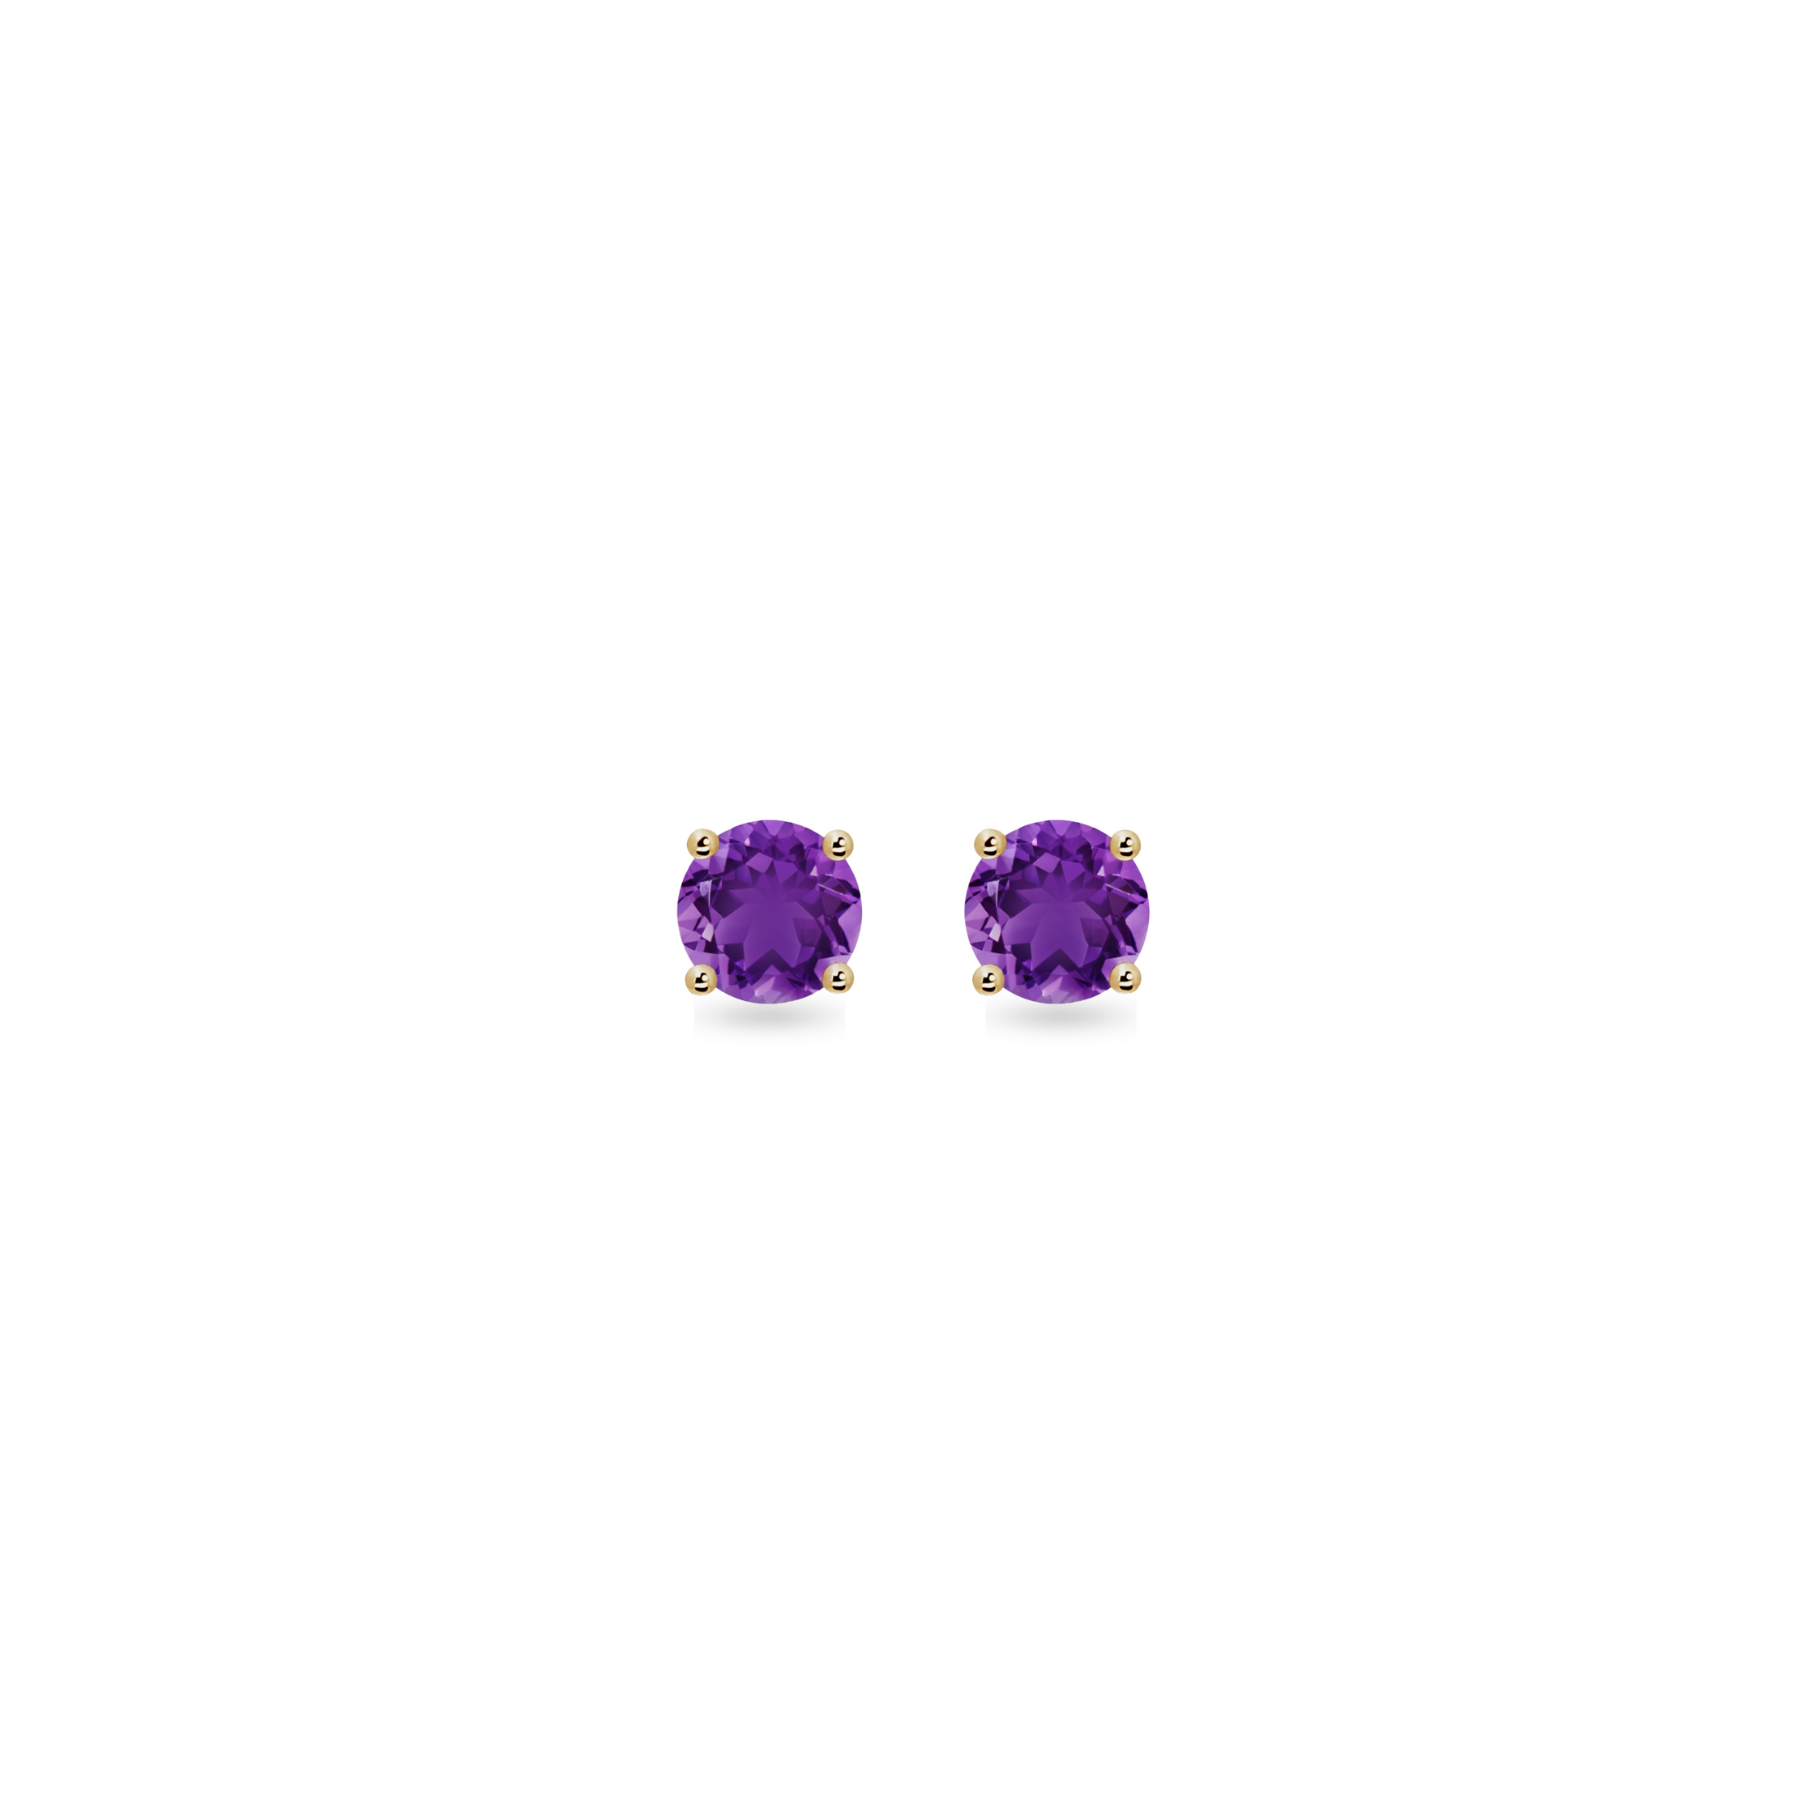 Forever Classic 5mm Round Amethyst Solitaire 9ct Gold Stud Earrings